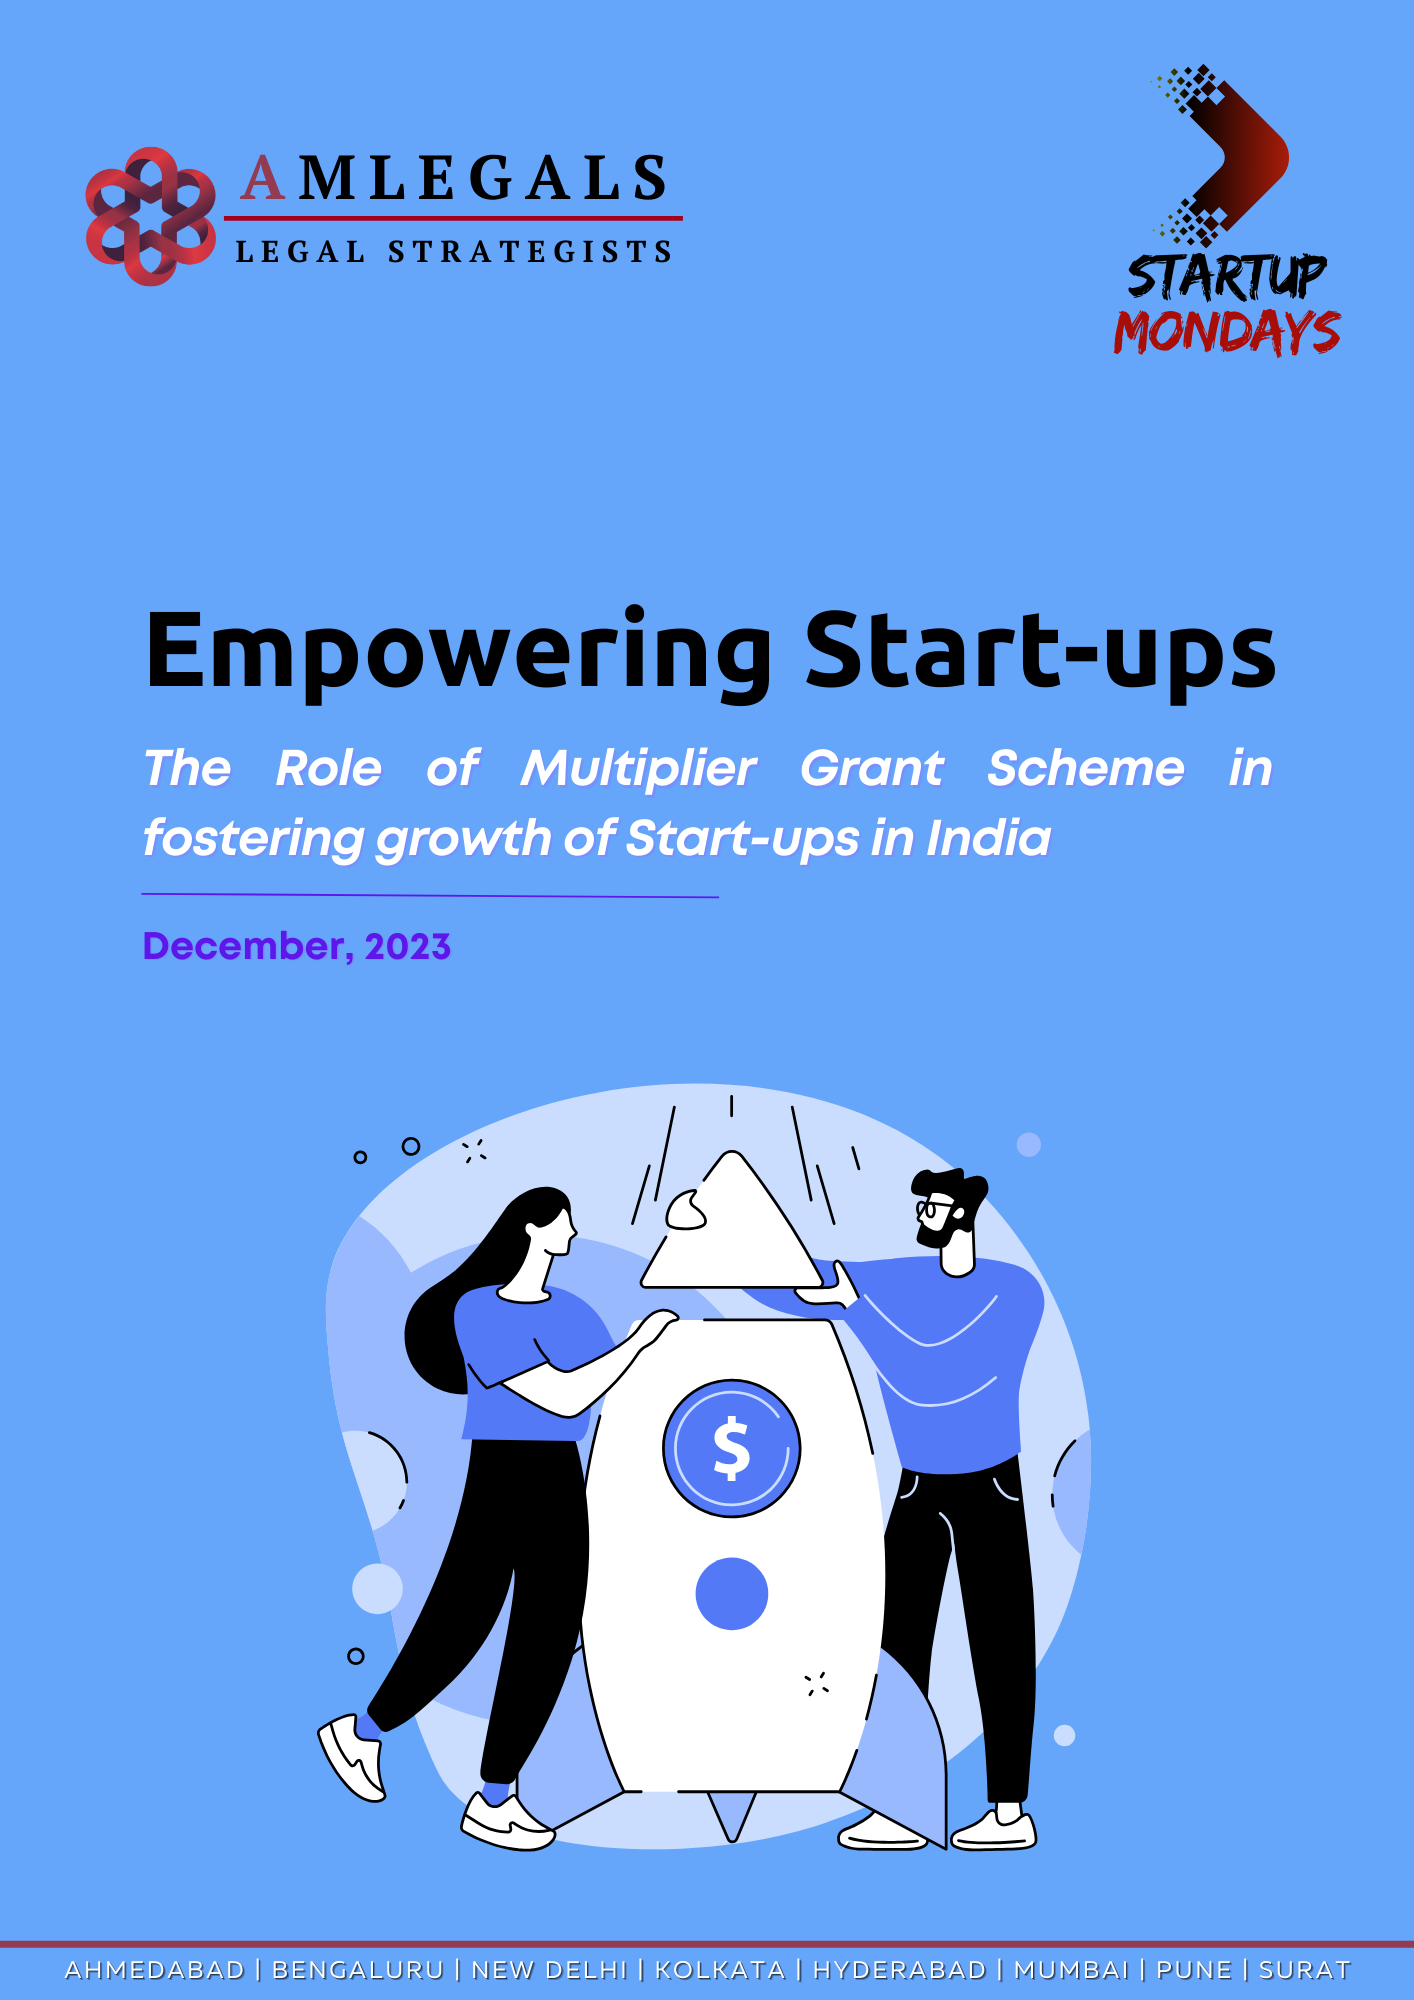 The Role of Multiplier Grant Scheme in fostering growth of Start-ups in India